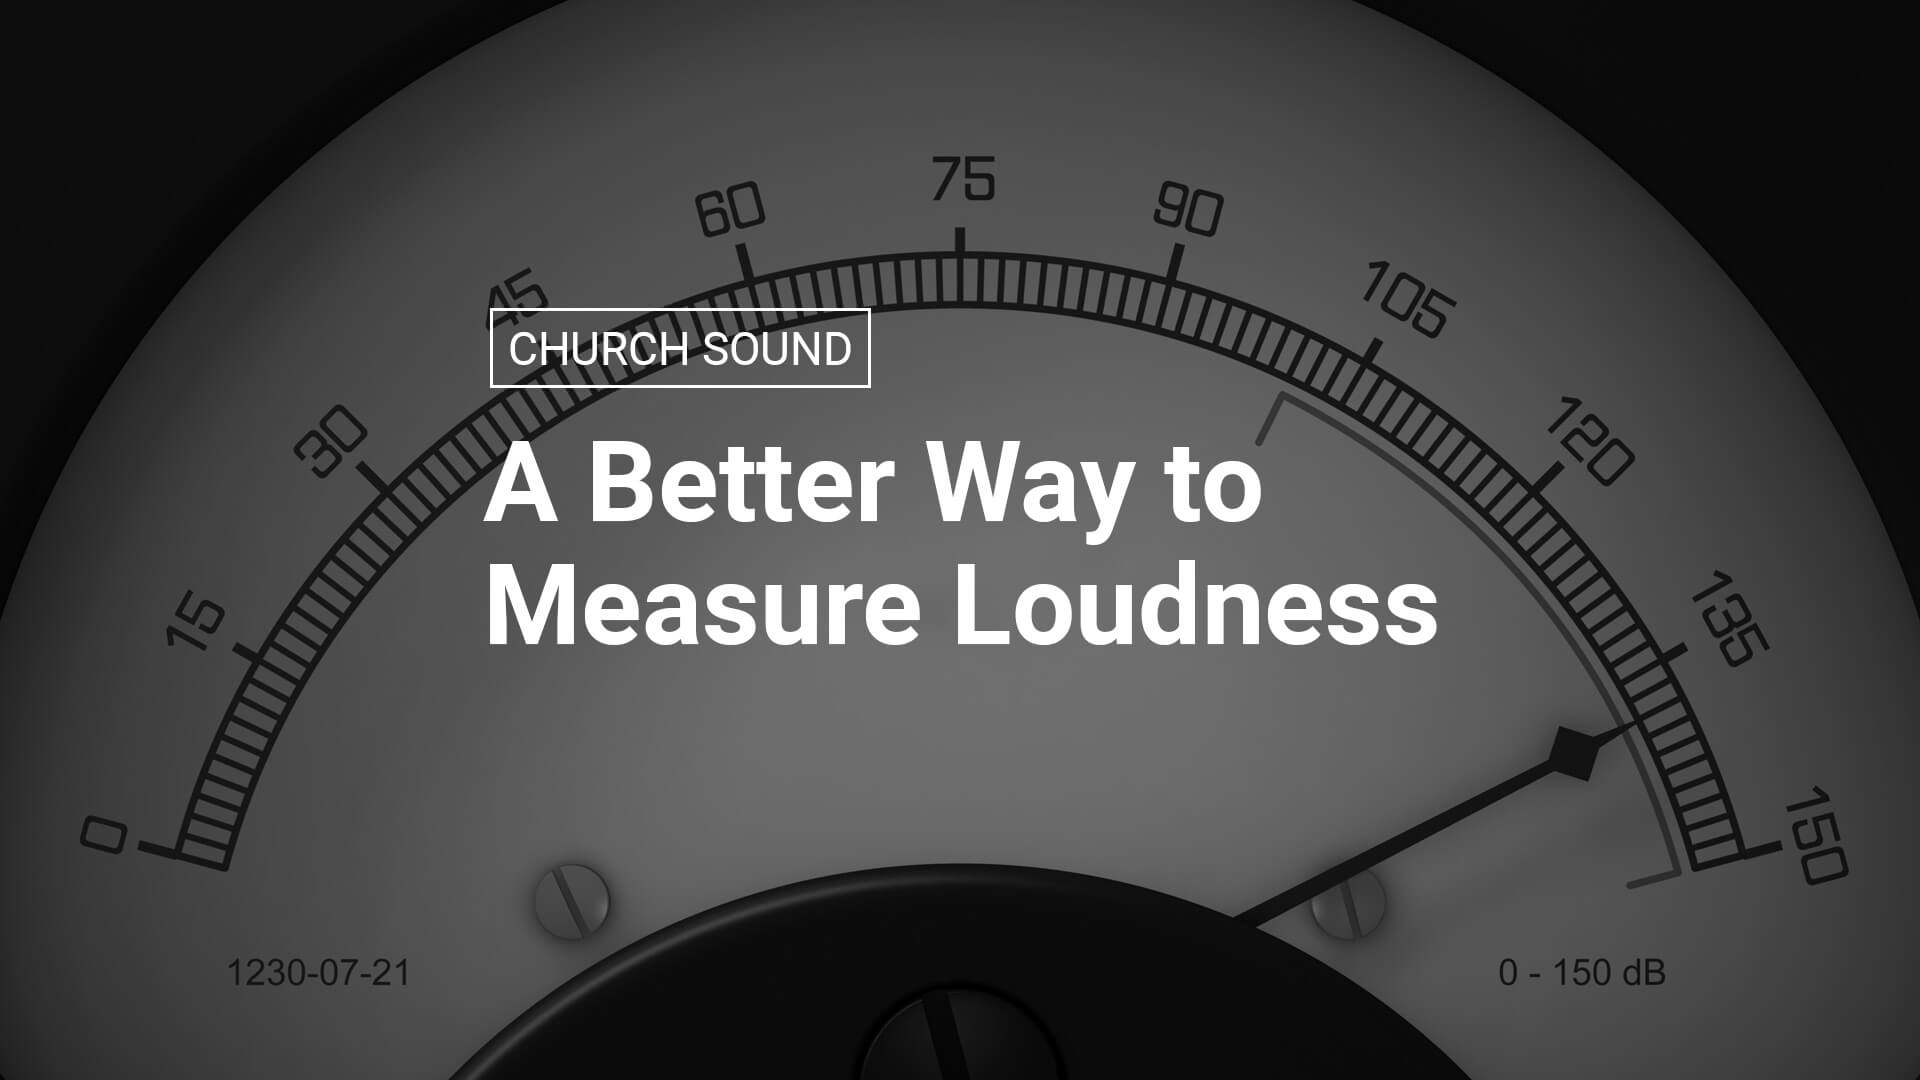 A Better Way to Measure Loudness